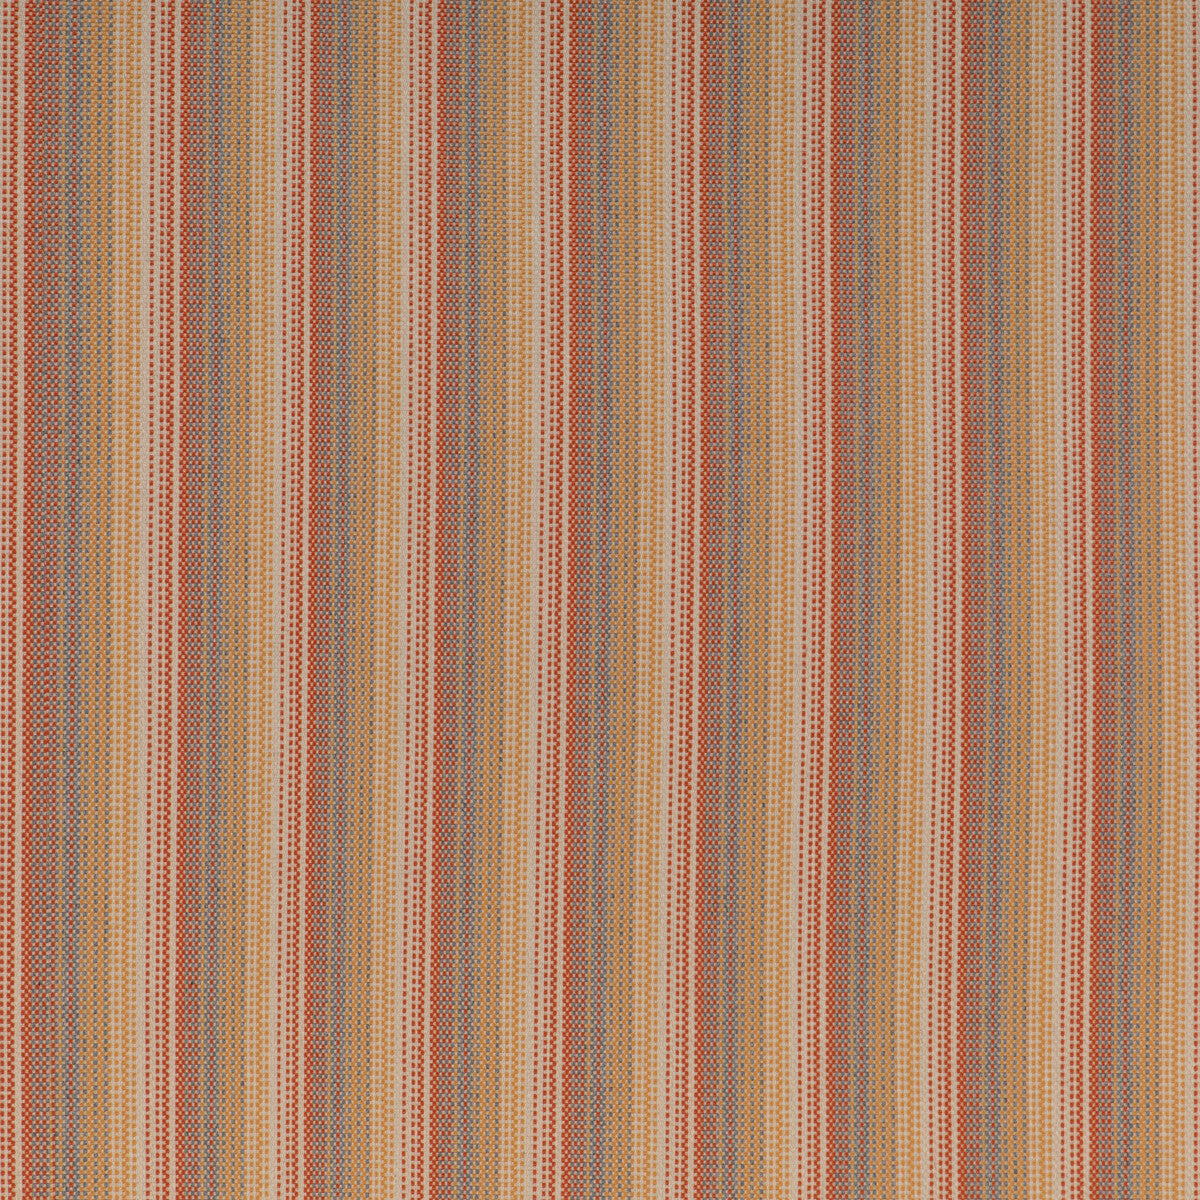 Baystreet fabric in clementine color - pattern 37068.1211.0 - by Kravet Contract in the Chesapeake collection